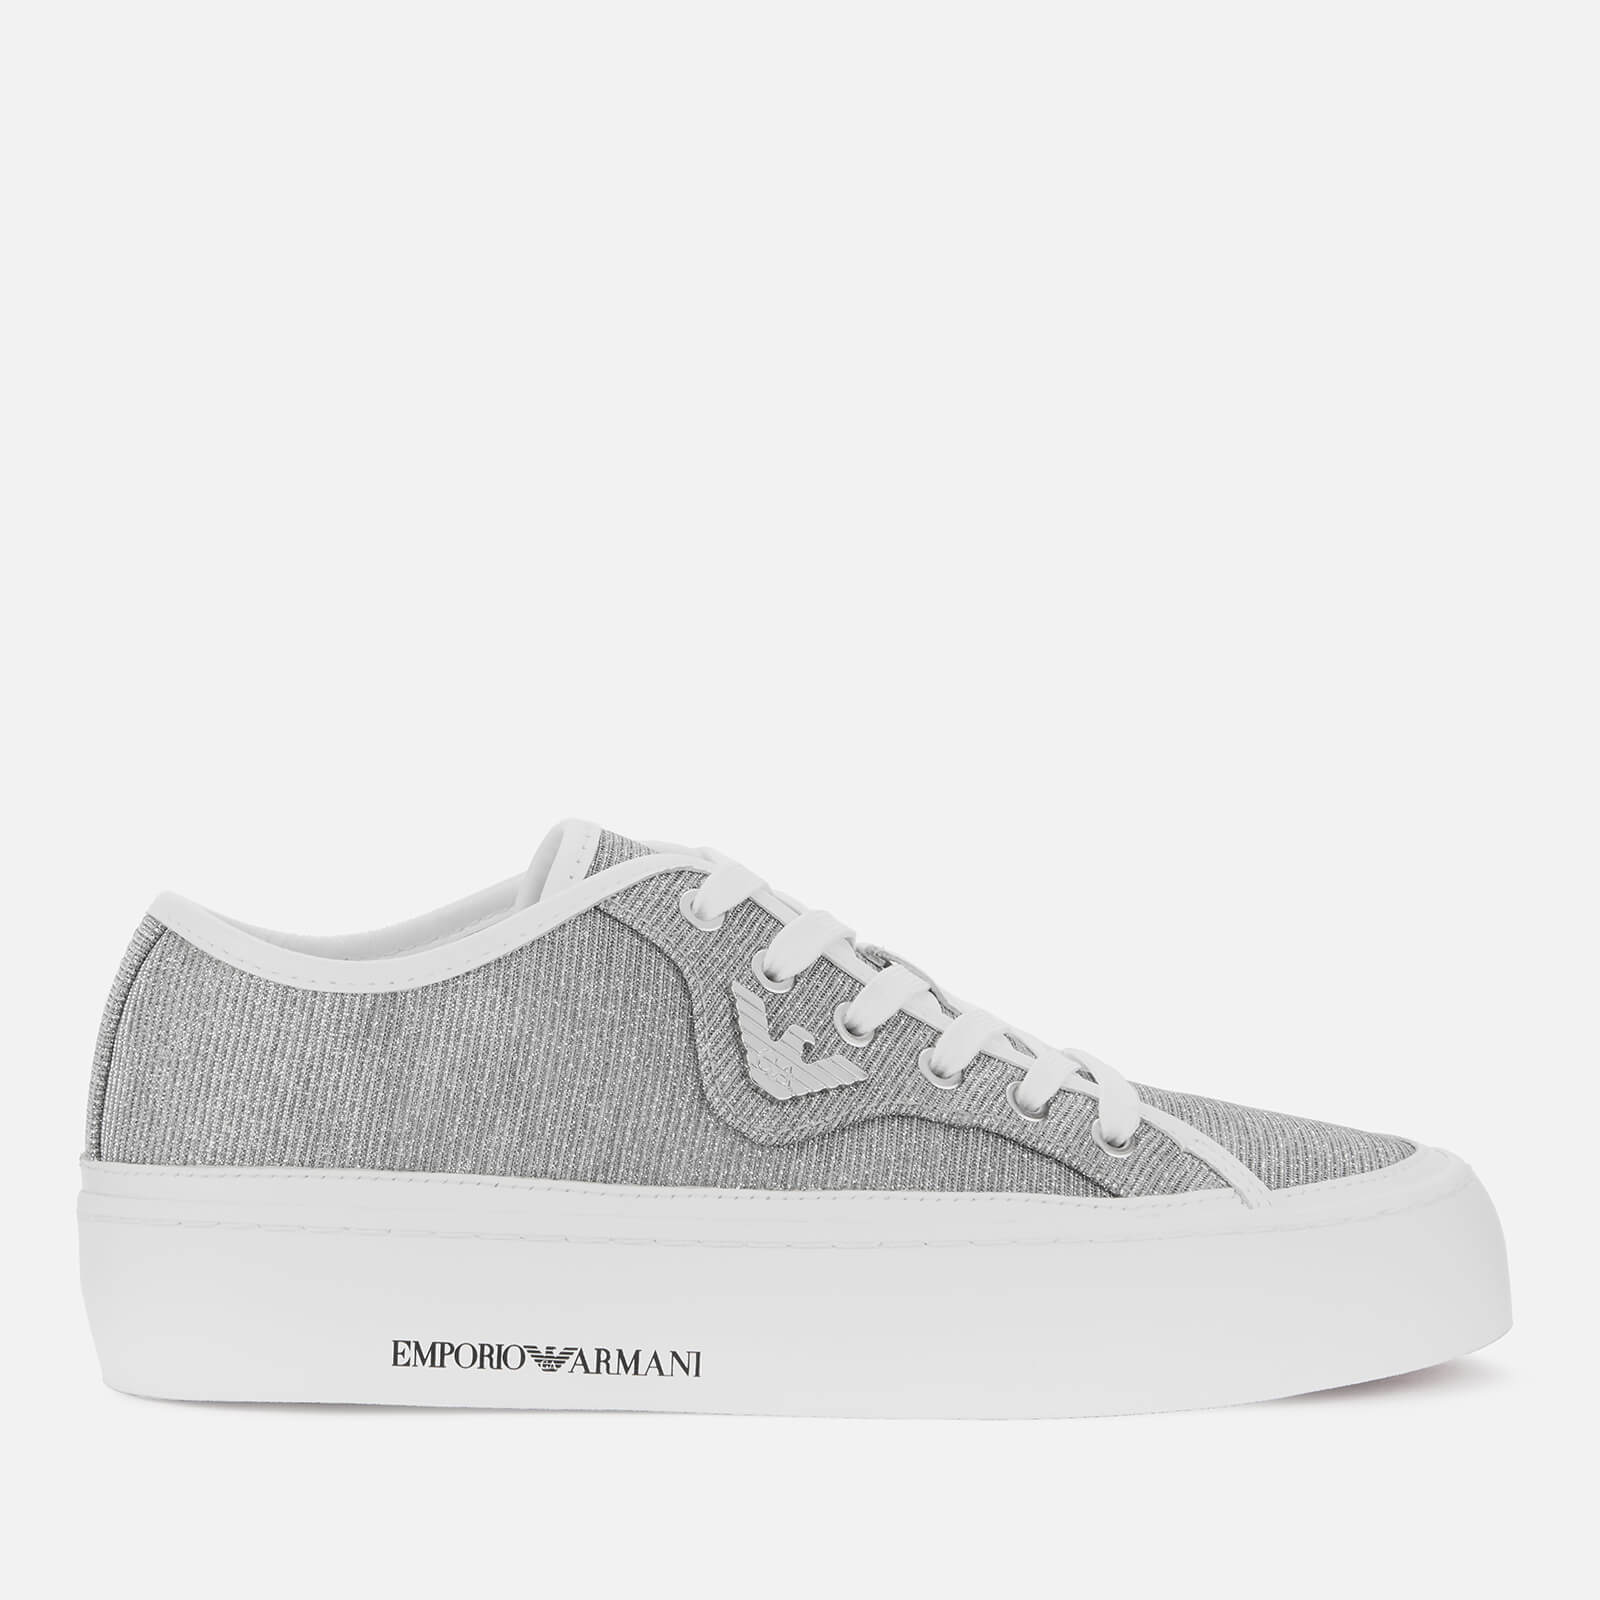 armani sparkly trainers, OFF 72%,Buy!